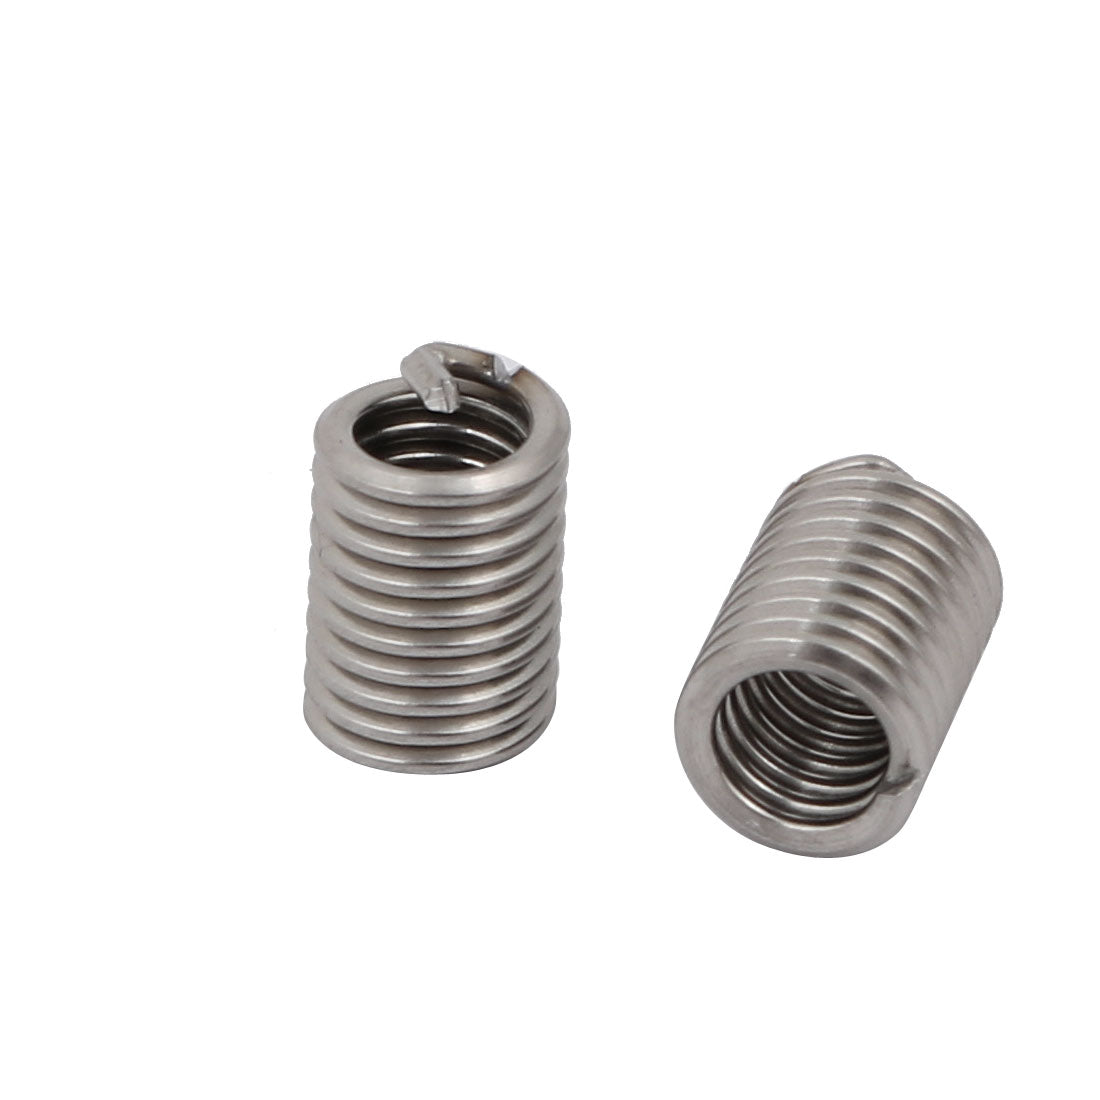 uxcell Uxcell #10-24x0.475" 304 Stainless Steel Helical Coil Wire Thread Insert 12pcs